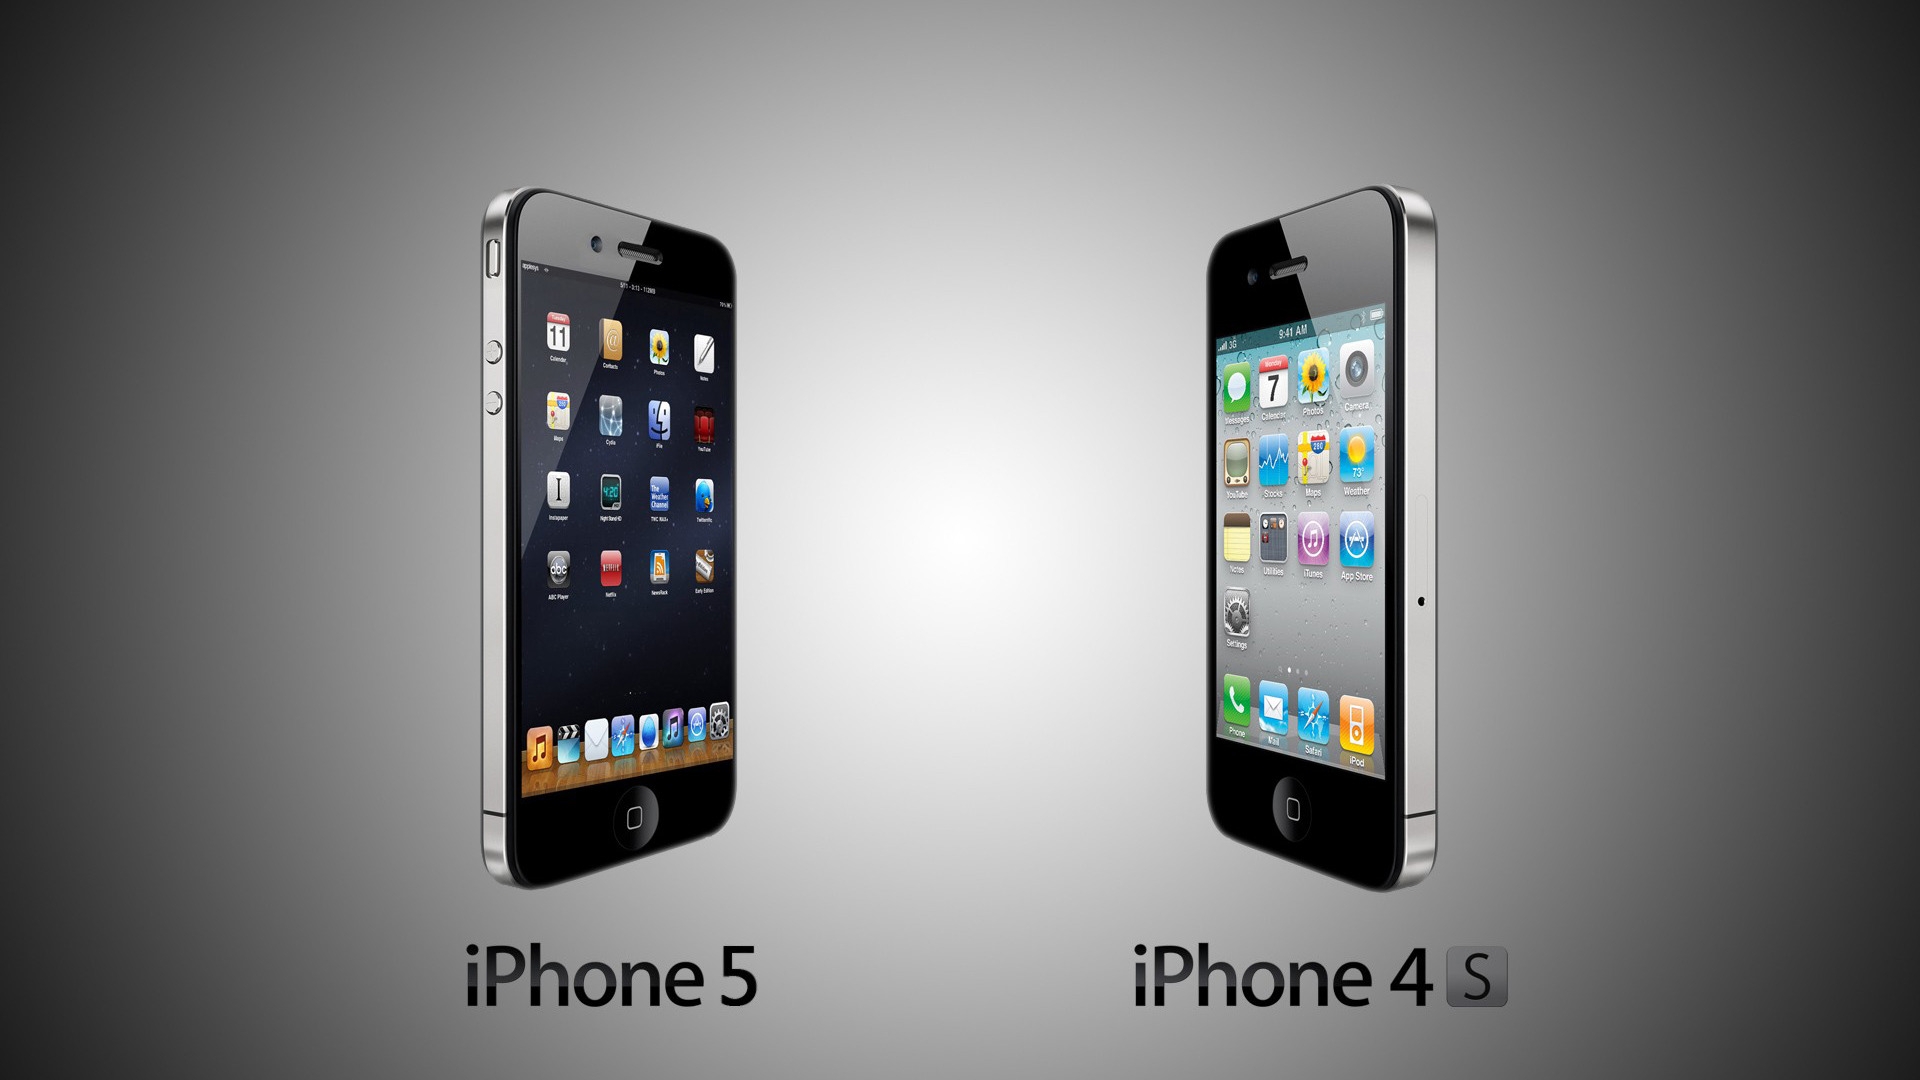 iPhone 4S and iPhone 5 for 1920 x 1080 HDTV 1080p resolution